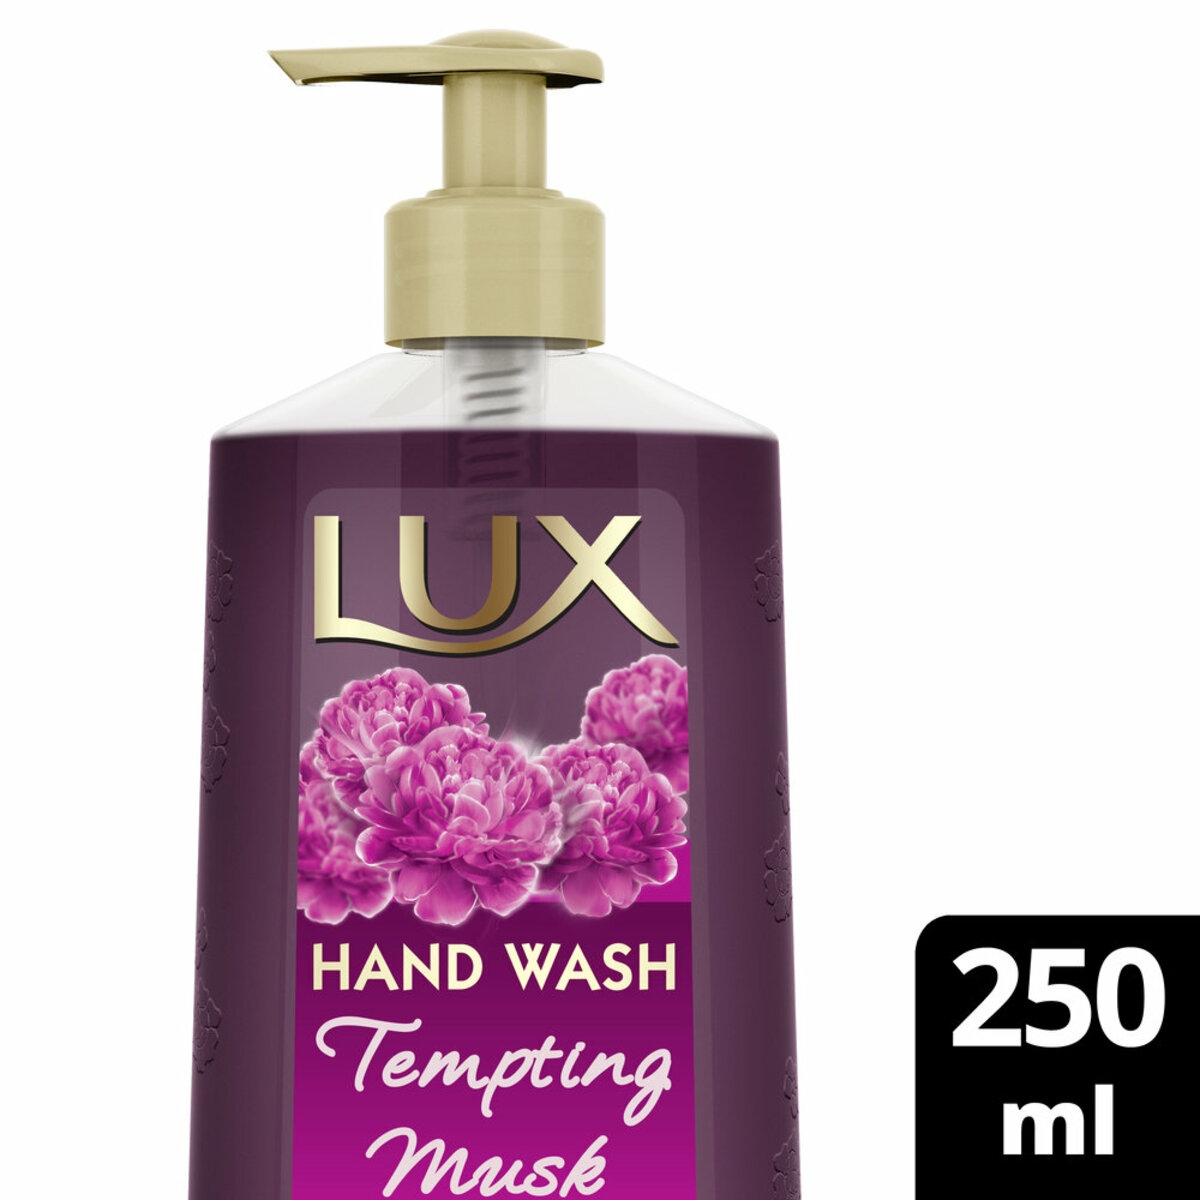 Lux Perfumed Hand Wash Tempting Musk 250 ml